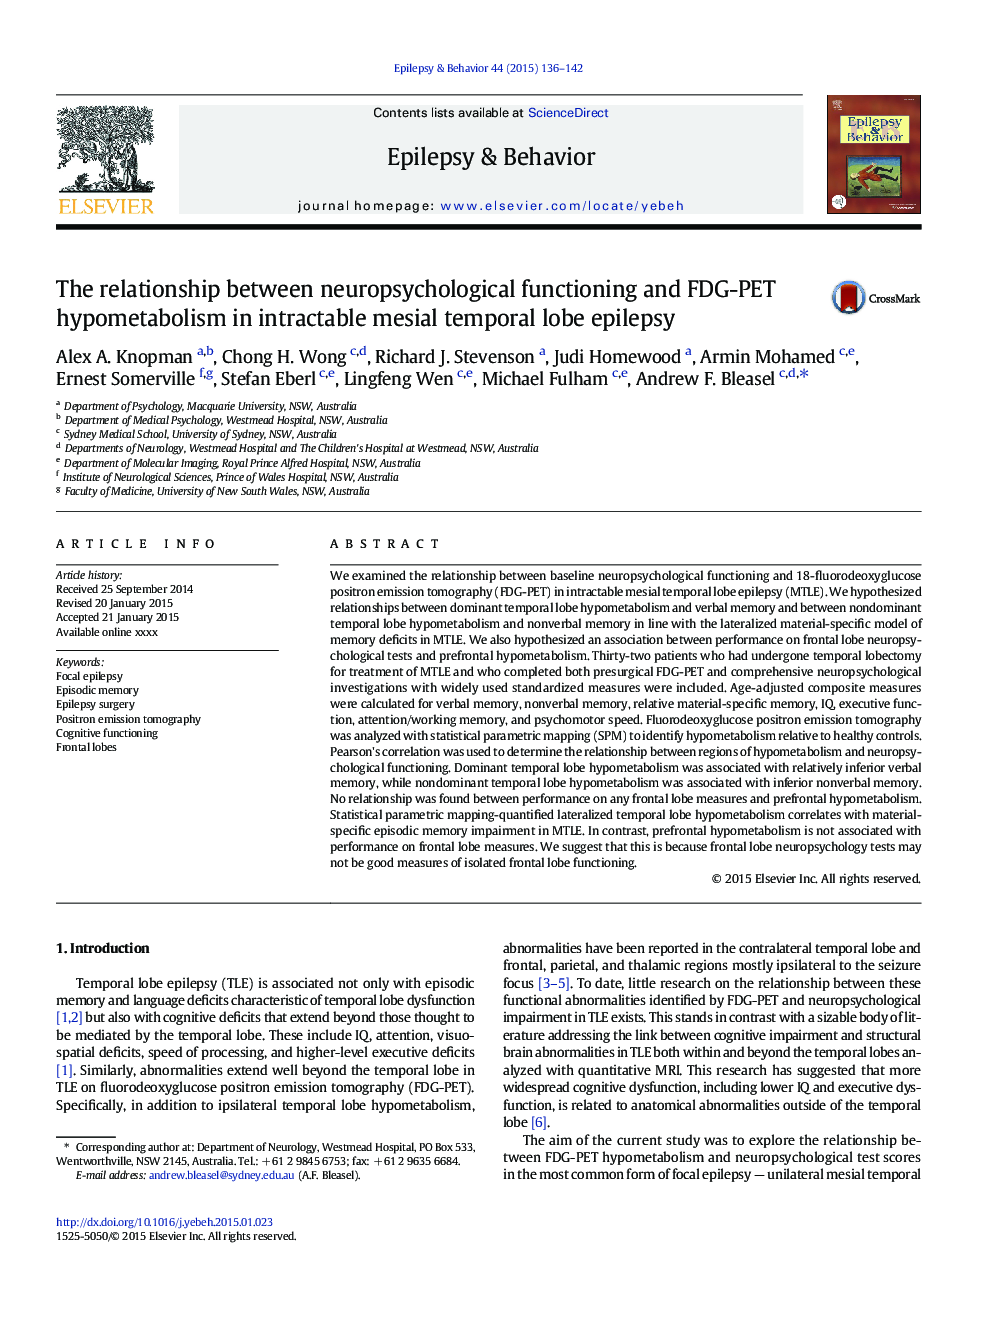 The relationship between neuropsychological functioning and FDG-PET hypometabolism in intractable mesial temporal lobe epilepsy